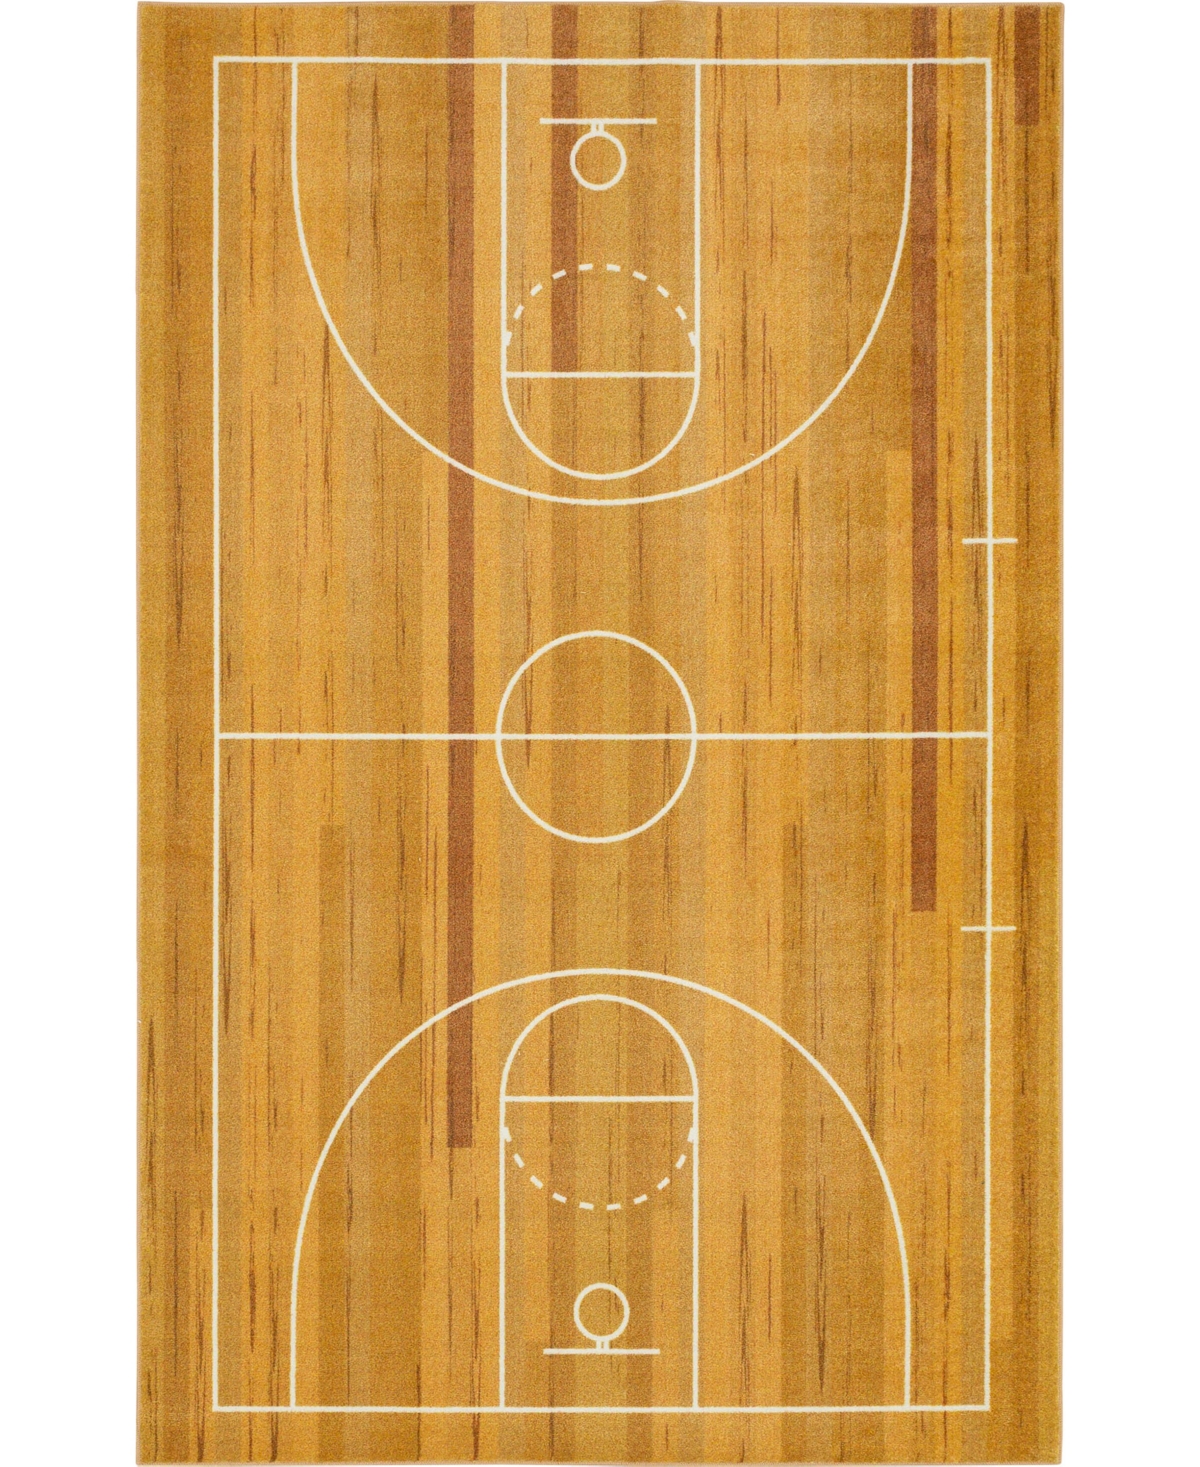 Mohawk Prismatic Basketball Court Kids Rug 3'4" X 5' Area Rug In Brown